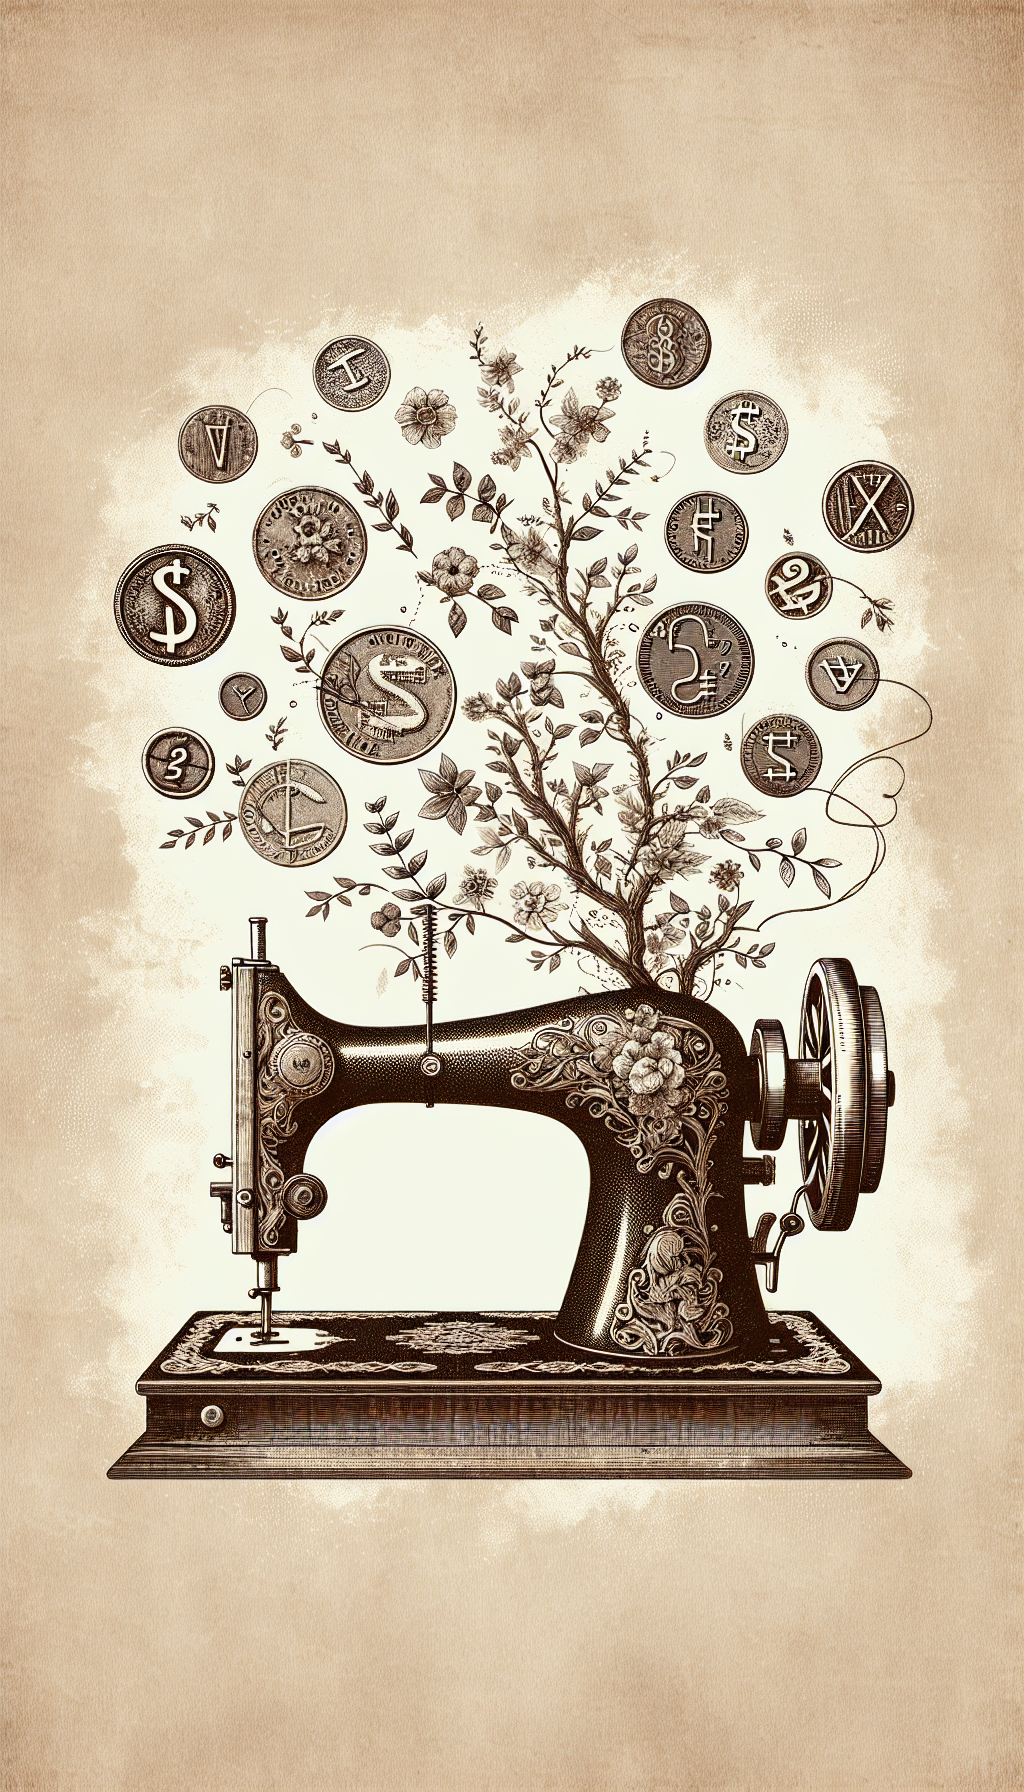 An intricate illustration depicts a sepia-toned vintage sewing machine, with delicate vines and flowers blossoming from its mechanisms, symbolizing growth from history. Floating above, ghostly apparitions of currency symbols and antiquated price tags intertwine, signifying the machine's enduring value. The image, textured with cross-hatching and stippling, mirrors an aged etching to evoke a bygone era's elegance.